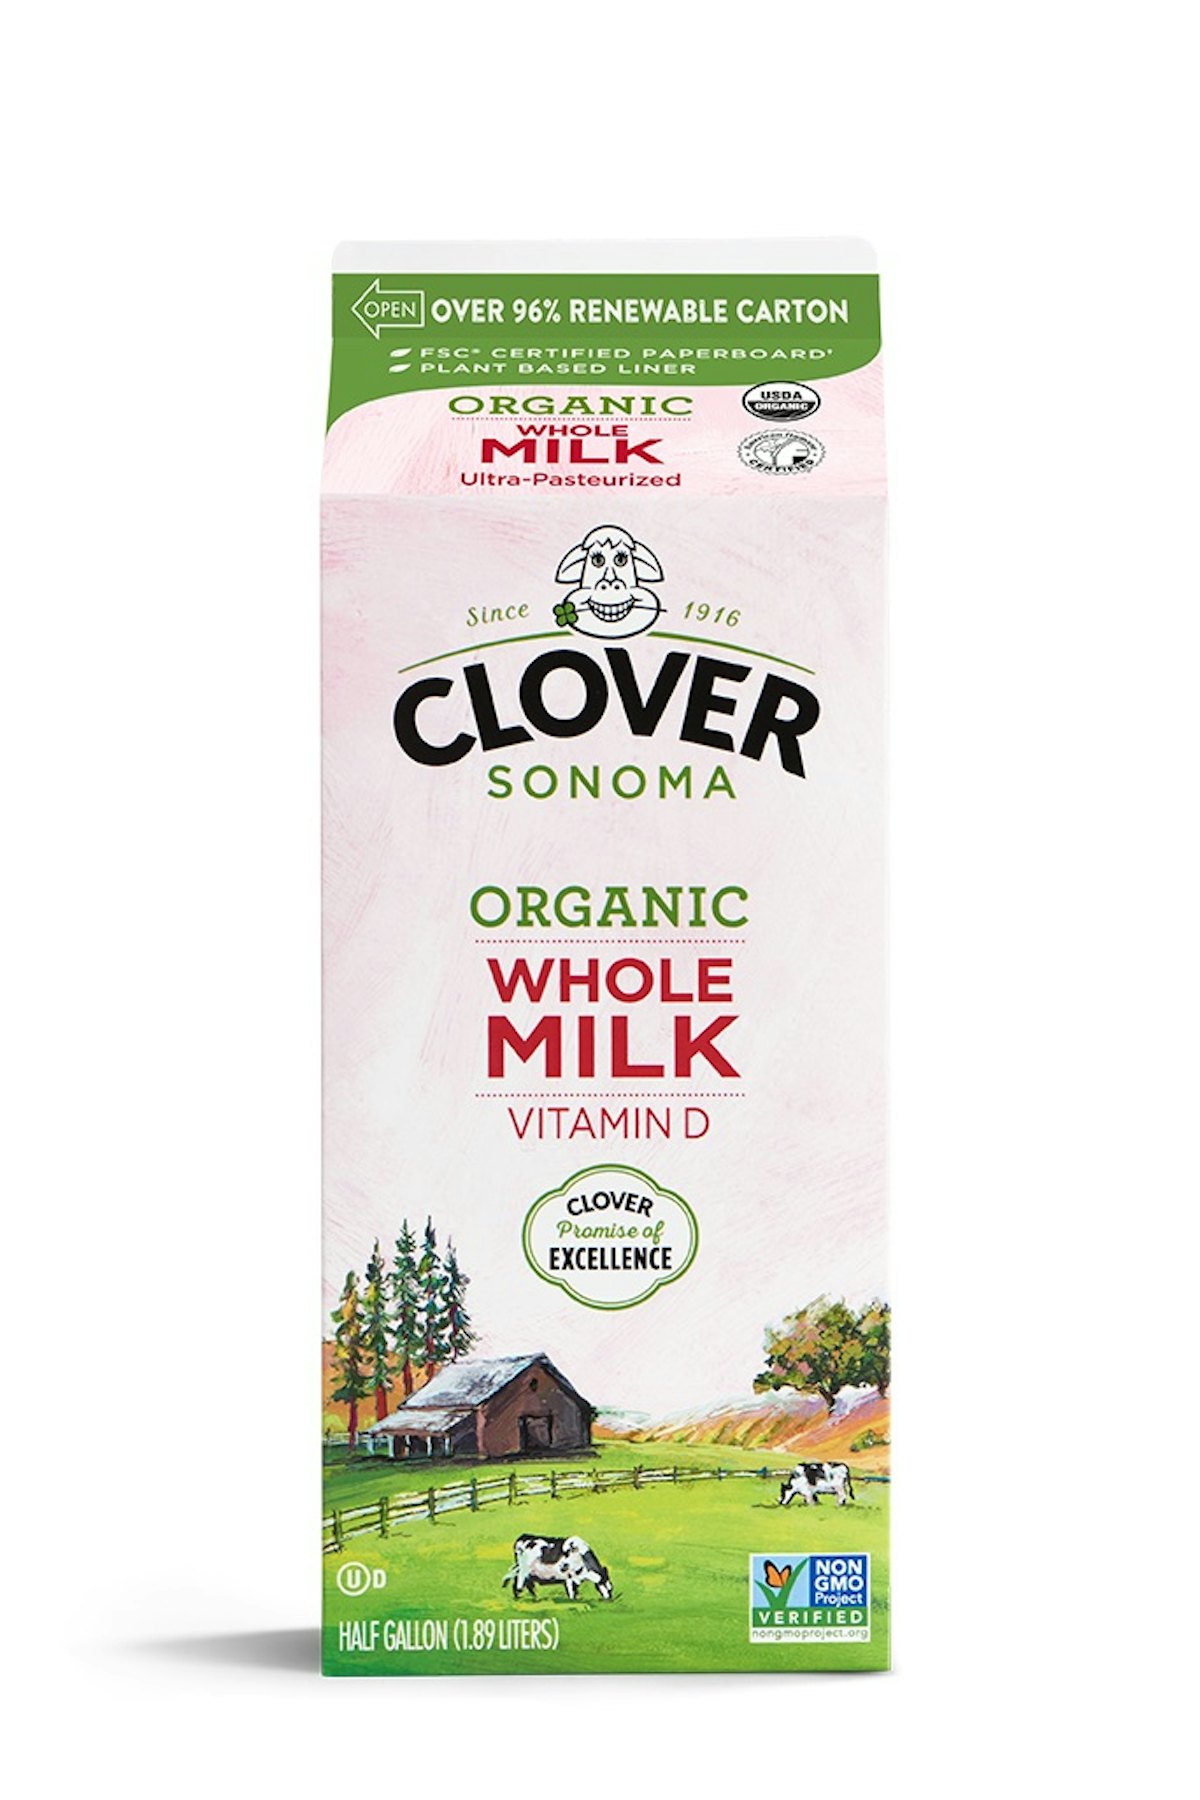 https://img.packworld.com/files/base/pmmi/all/image/2020/10/News_Clover_Sonoma.5f809cb18eb99.png?auto=format%2Ccompress&fit=max&q=70&w=1200